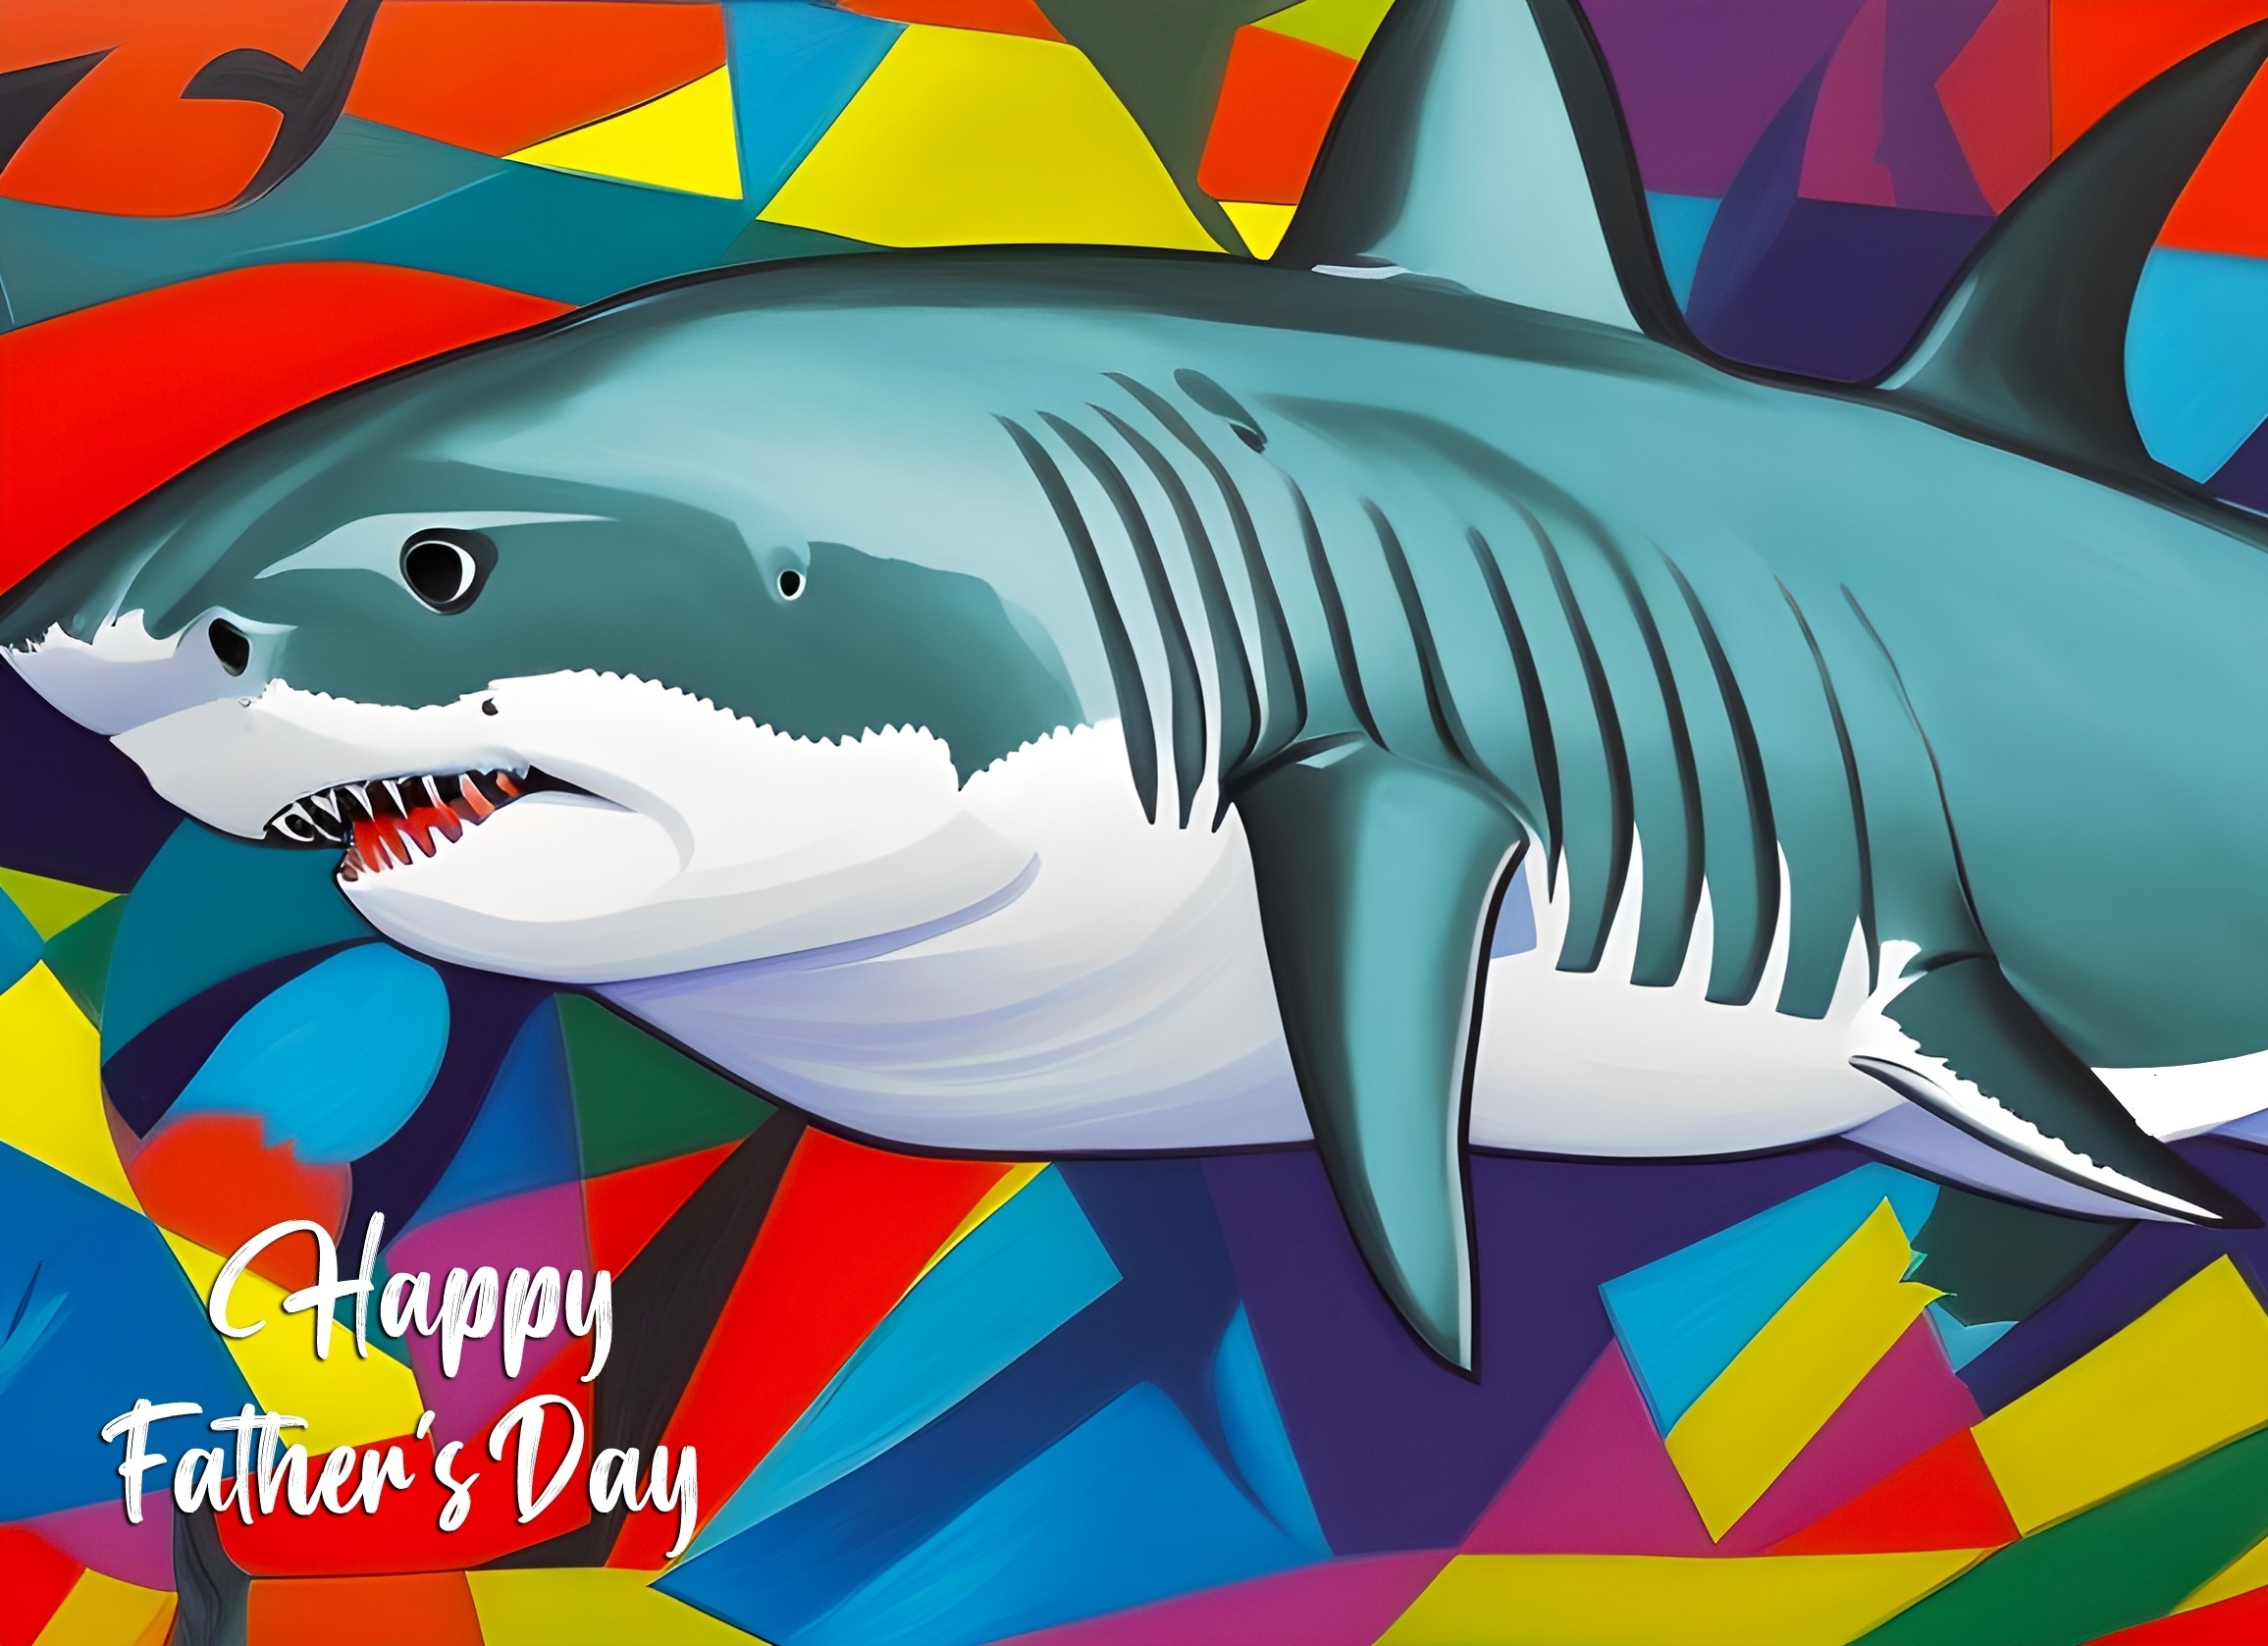 Shark Animal Colourful Abstract Art Fathers Day Card